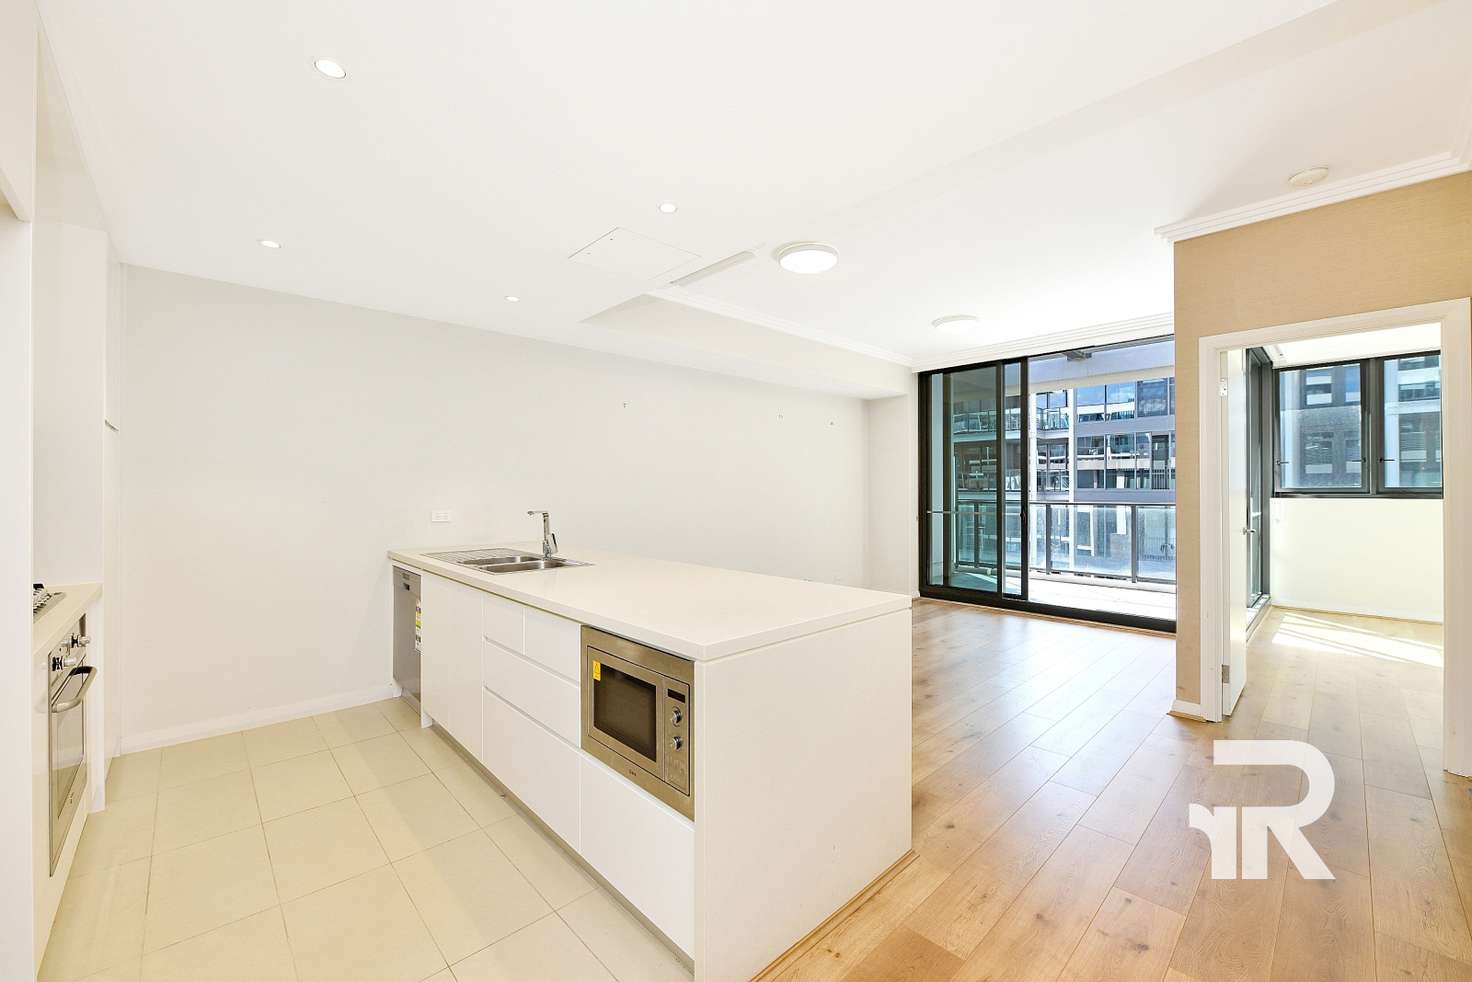 Main view of Homely apartment listing, 603/7 Waterways St, Wentworth Point NSW 2127